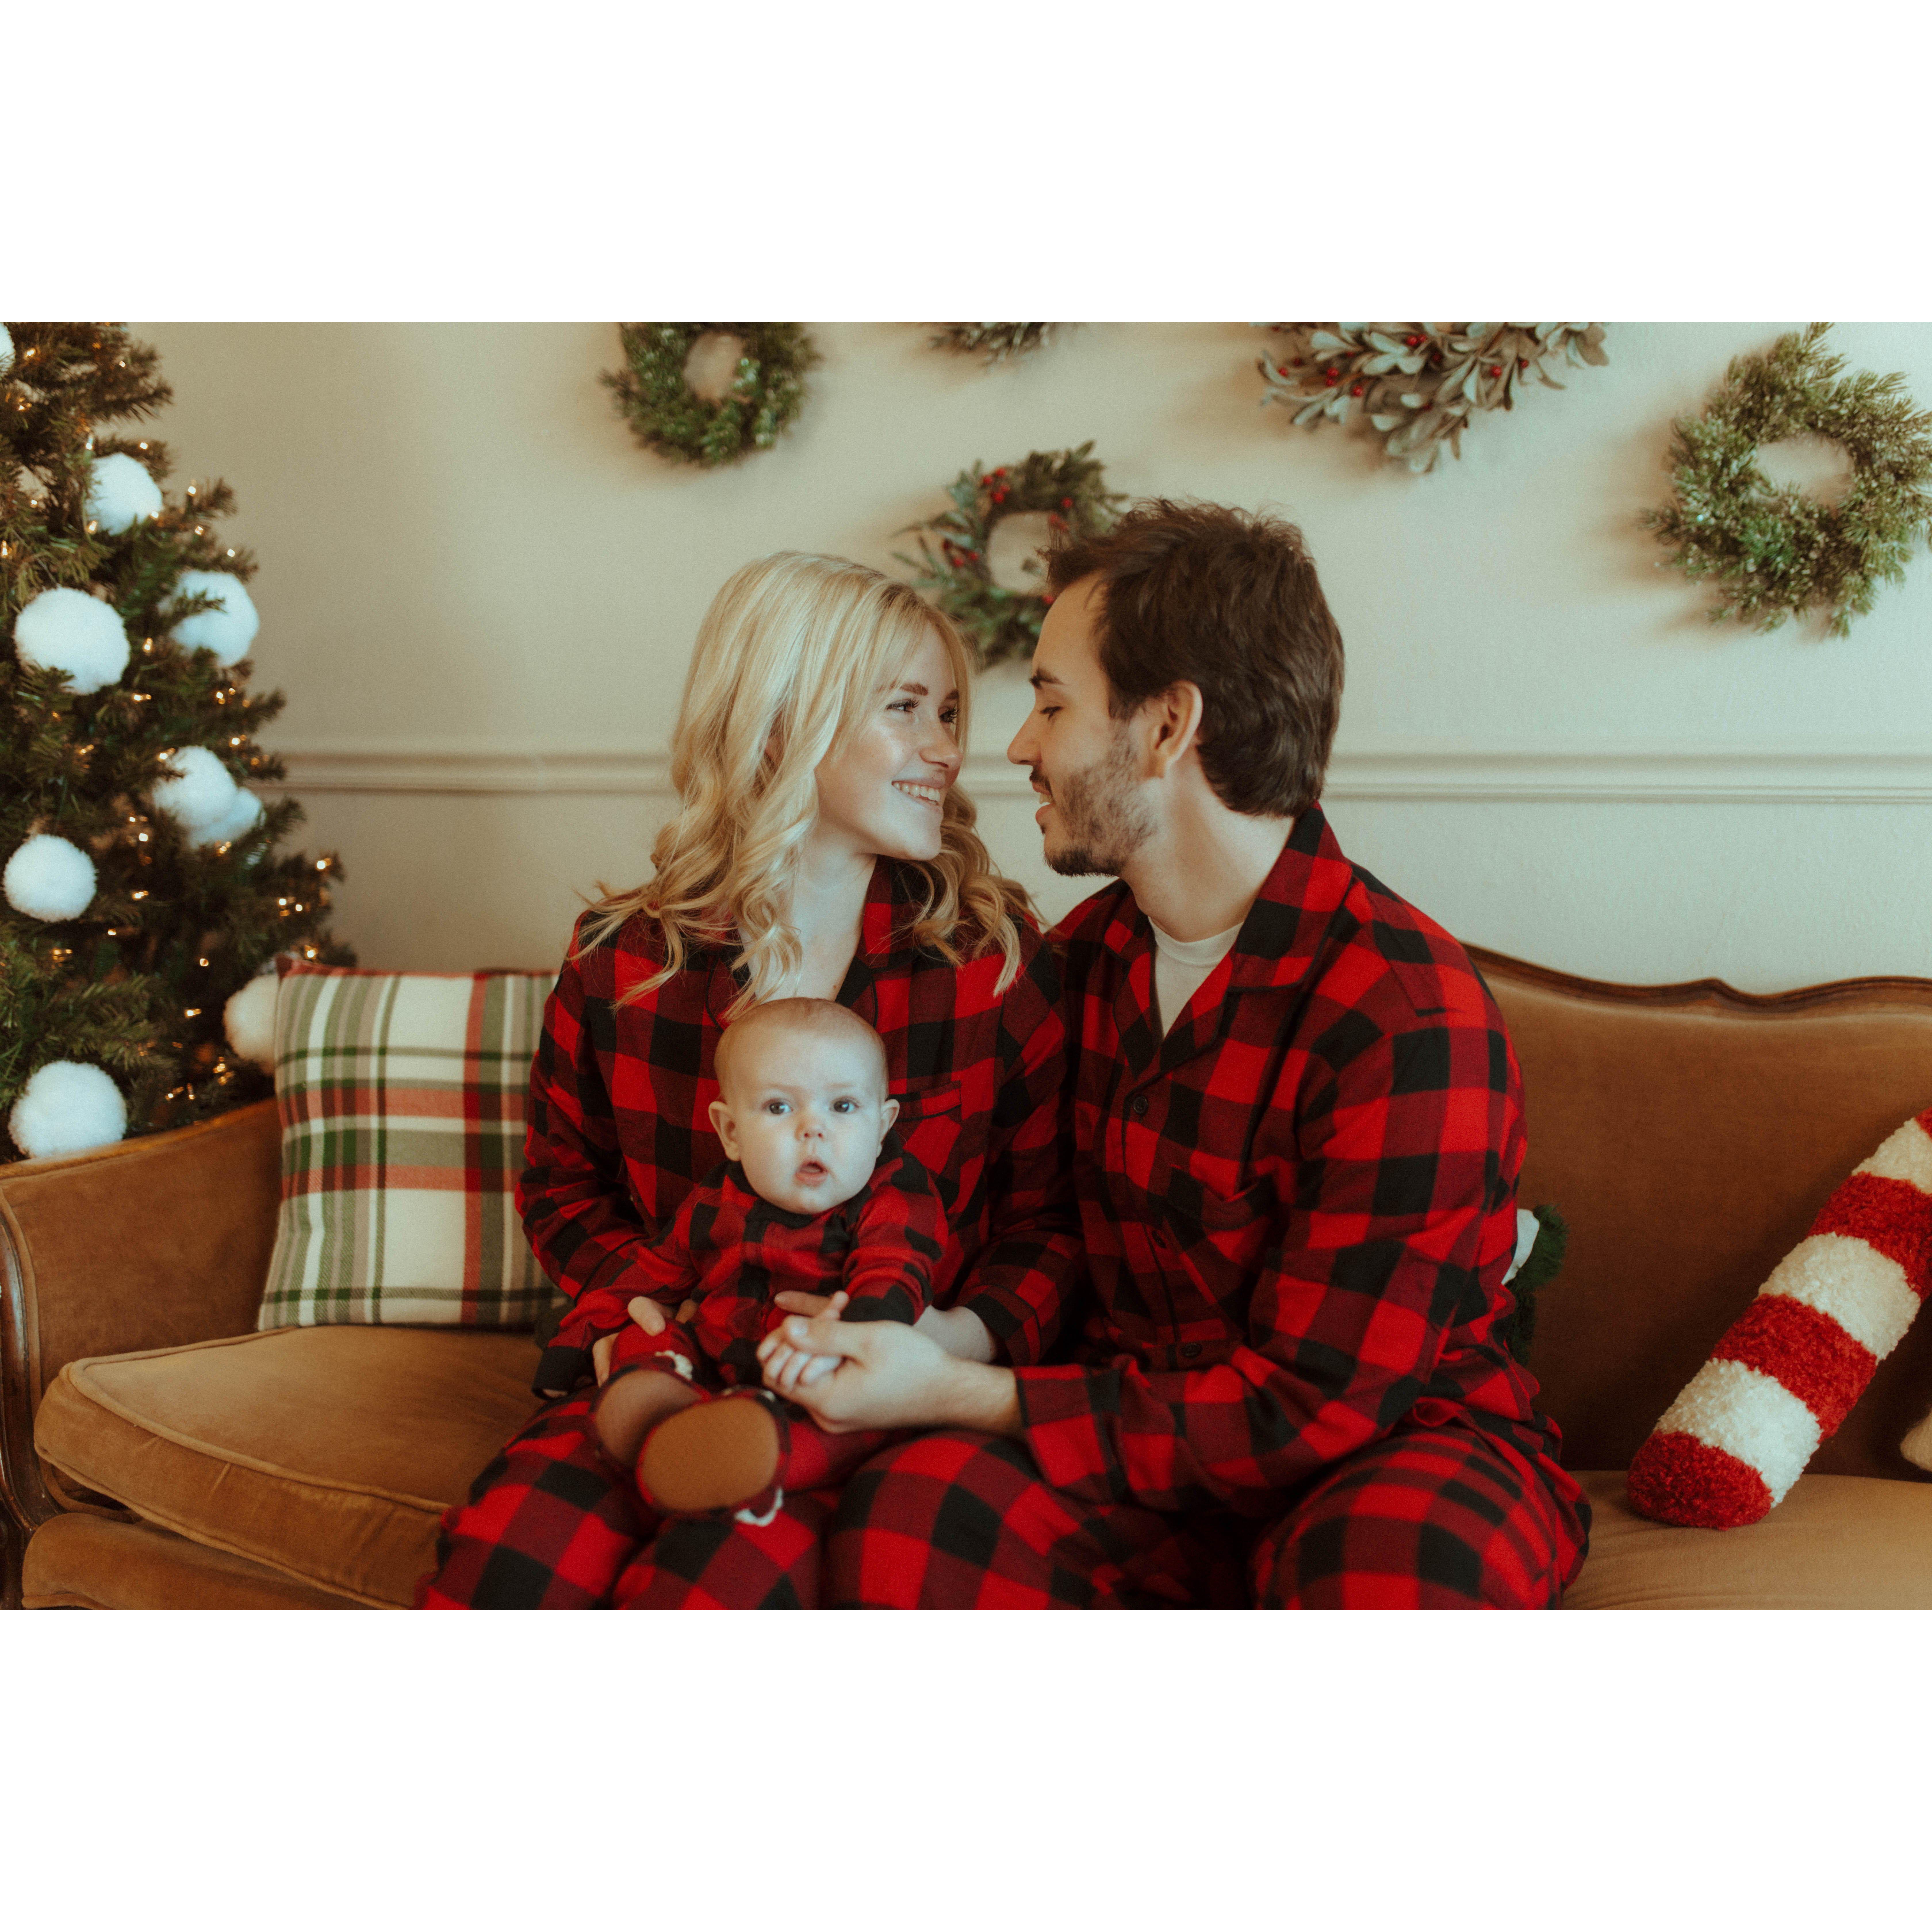 Our Christmas photos for our first year with Kennedy